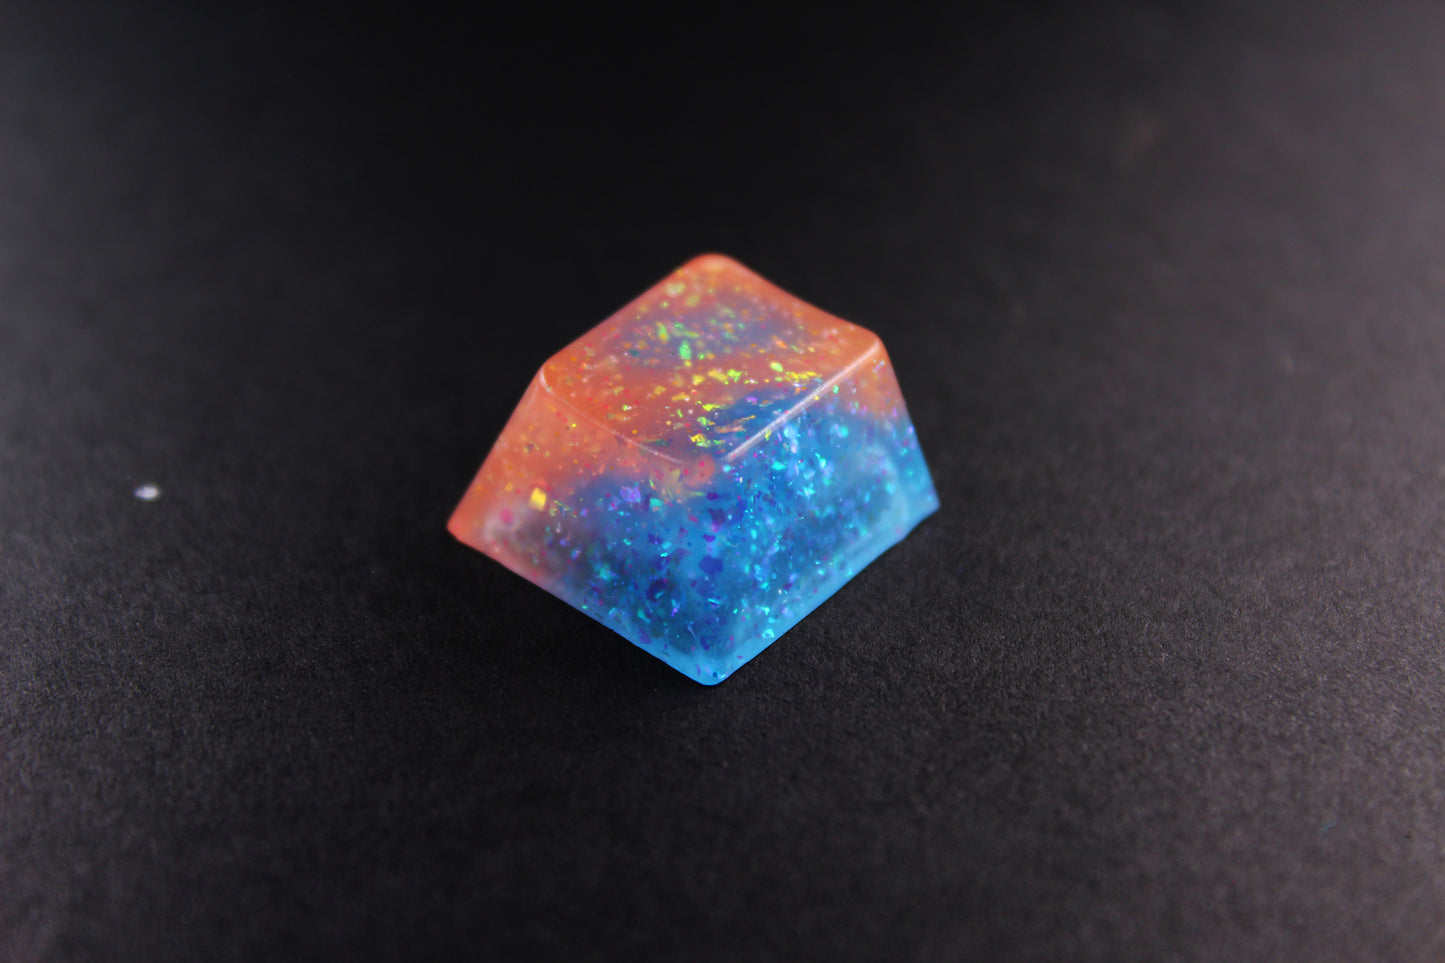 Cherry Esc - Elemental Glow 2 - PrimeCaps Keycap - Blank and Sculpted Artisan Keycaps for cherry MX mechanical keyboards 